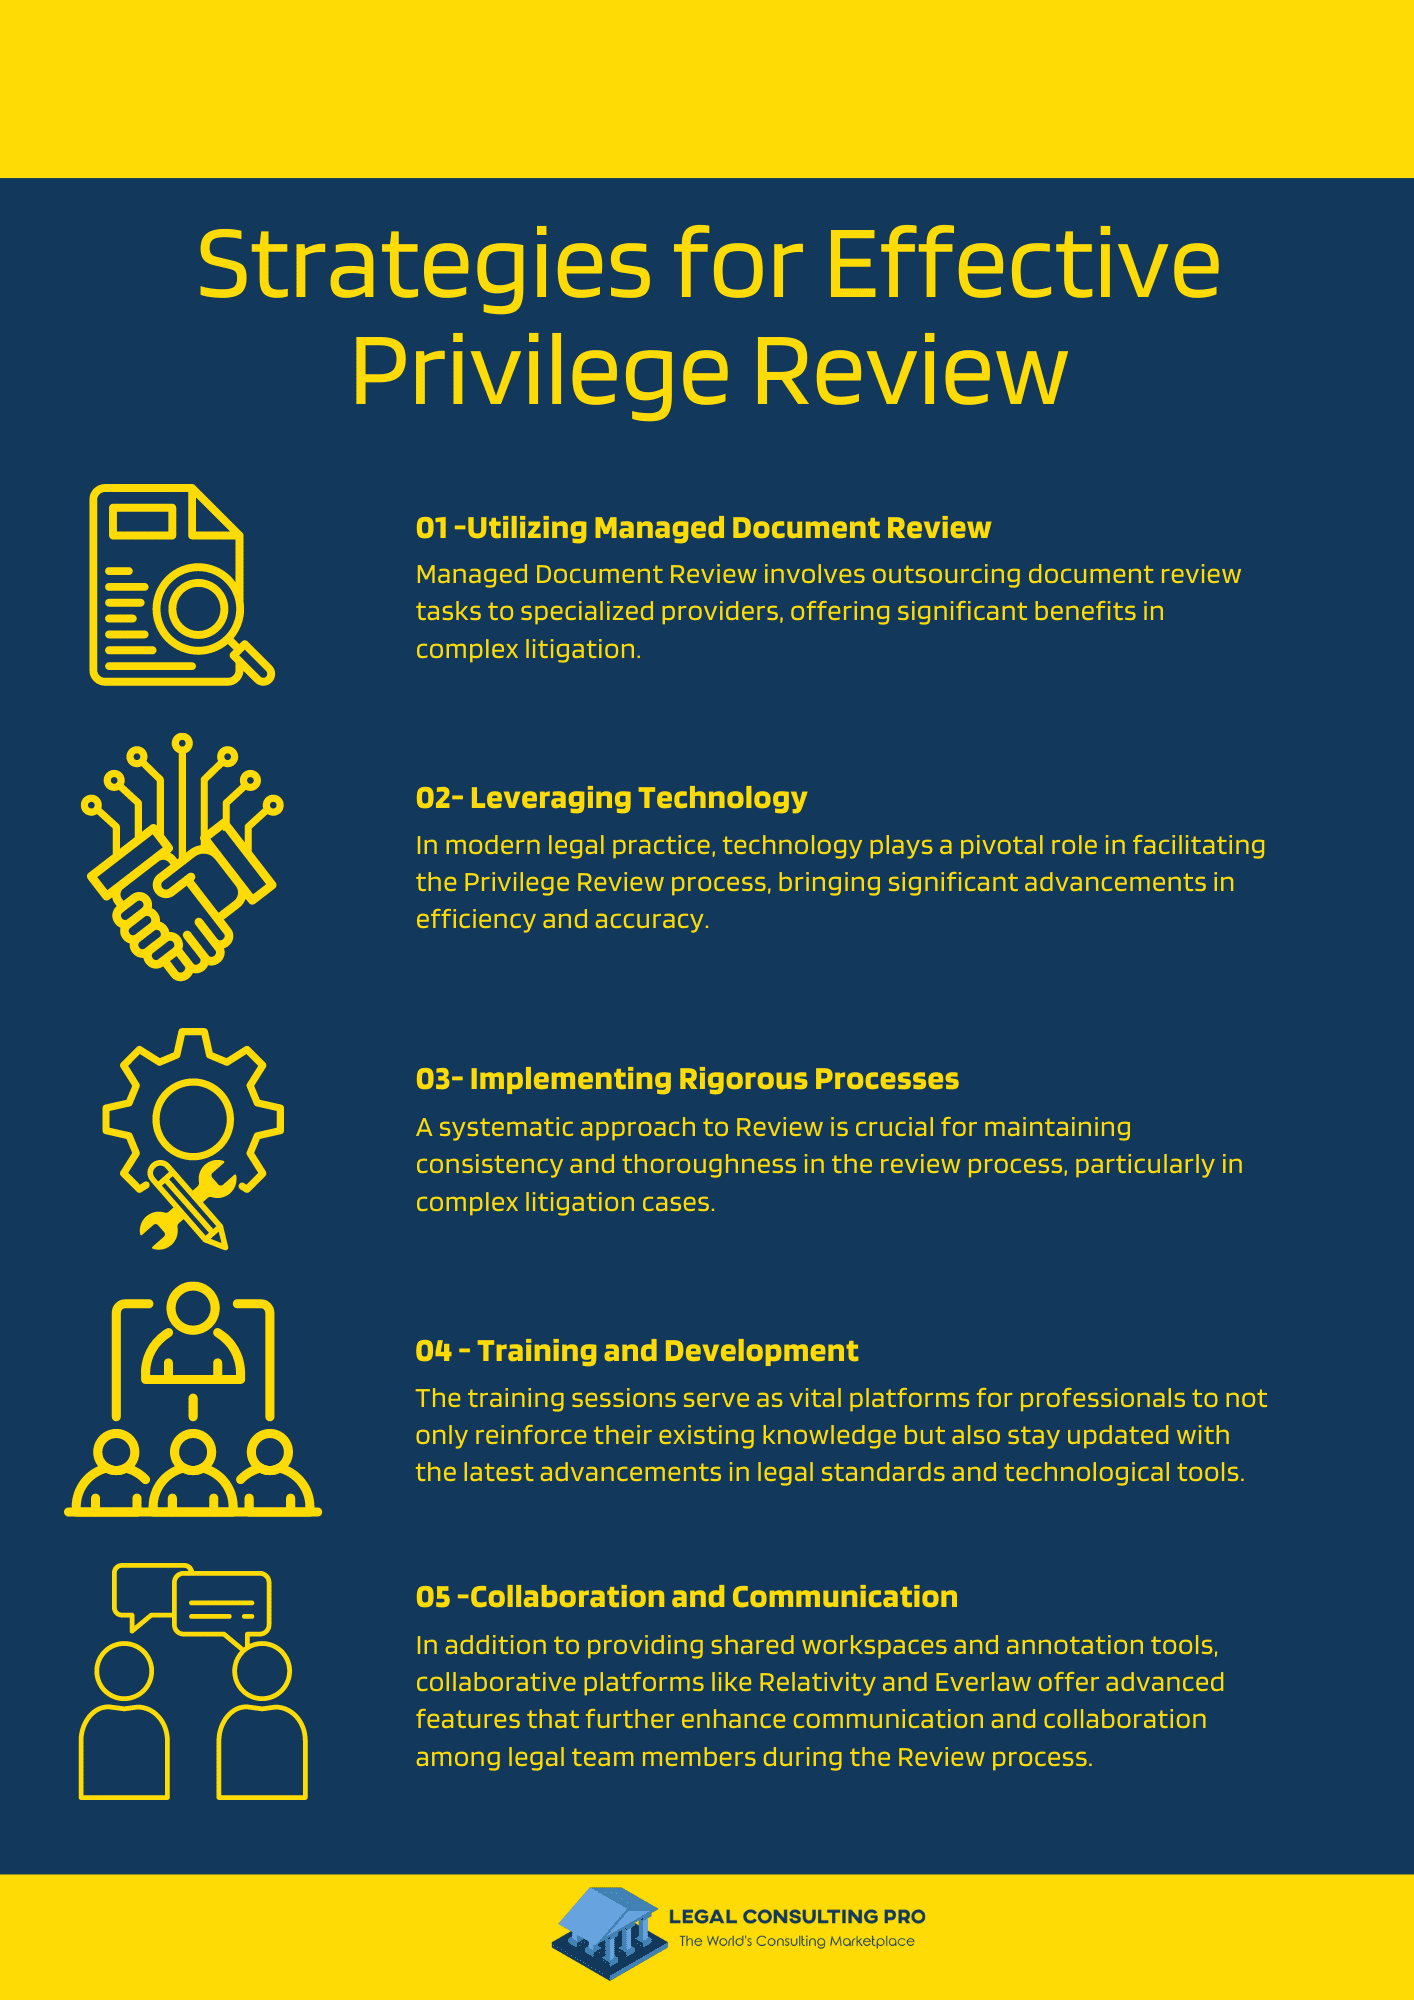 Strategies for Effective Privilege Review Infographic